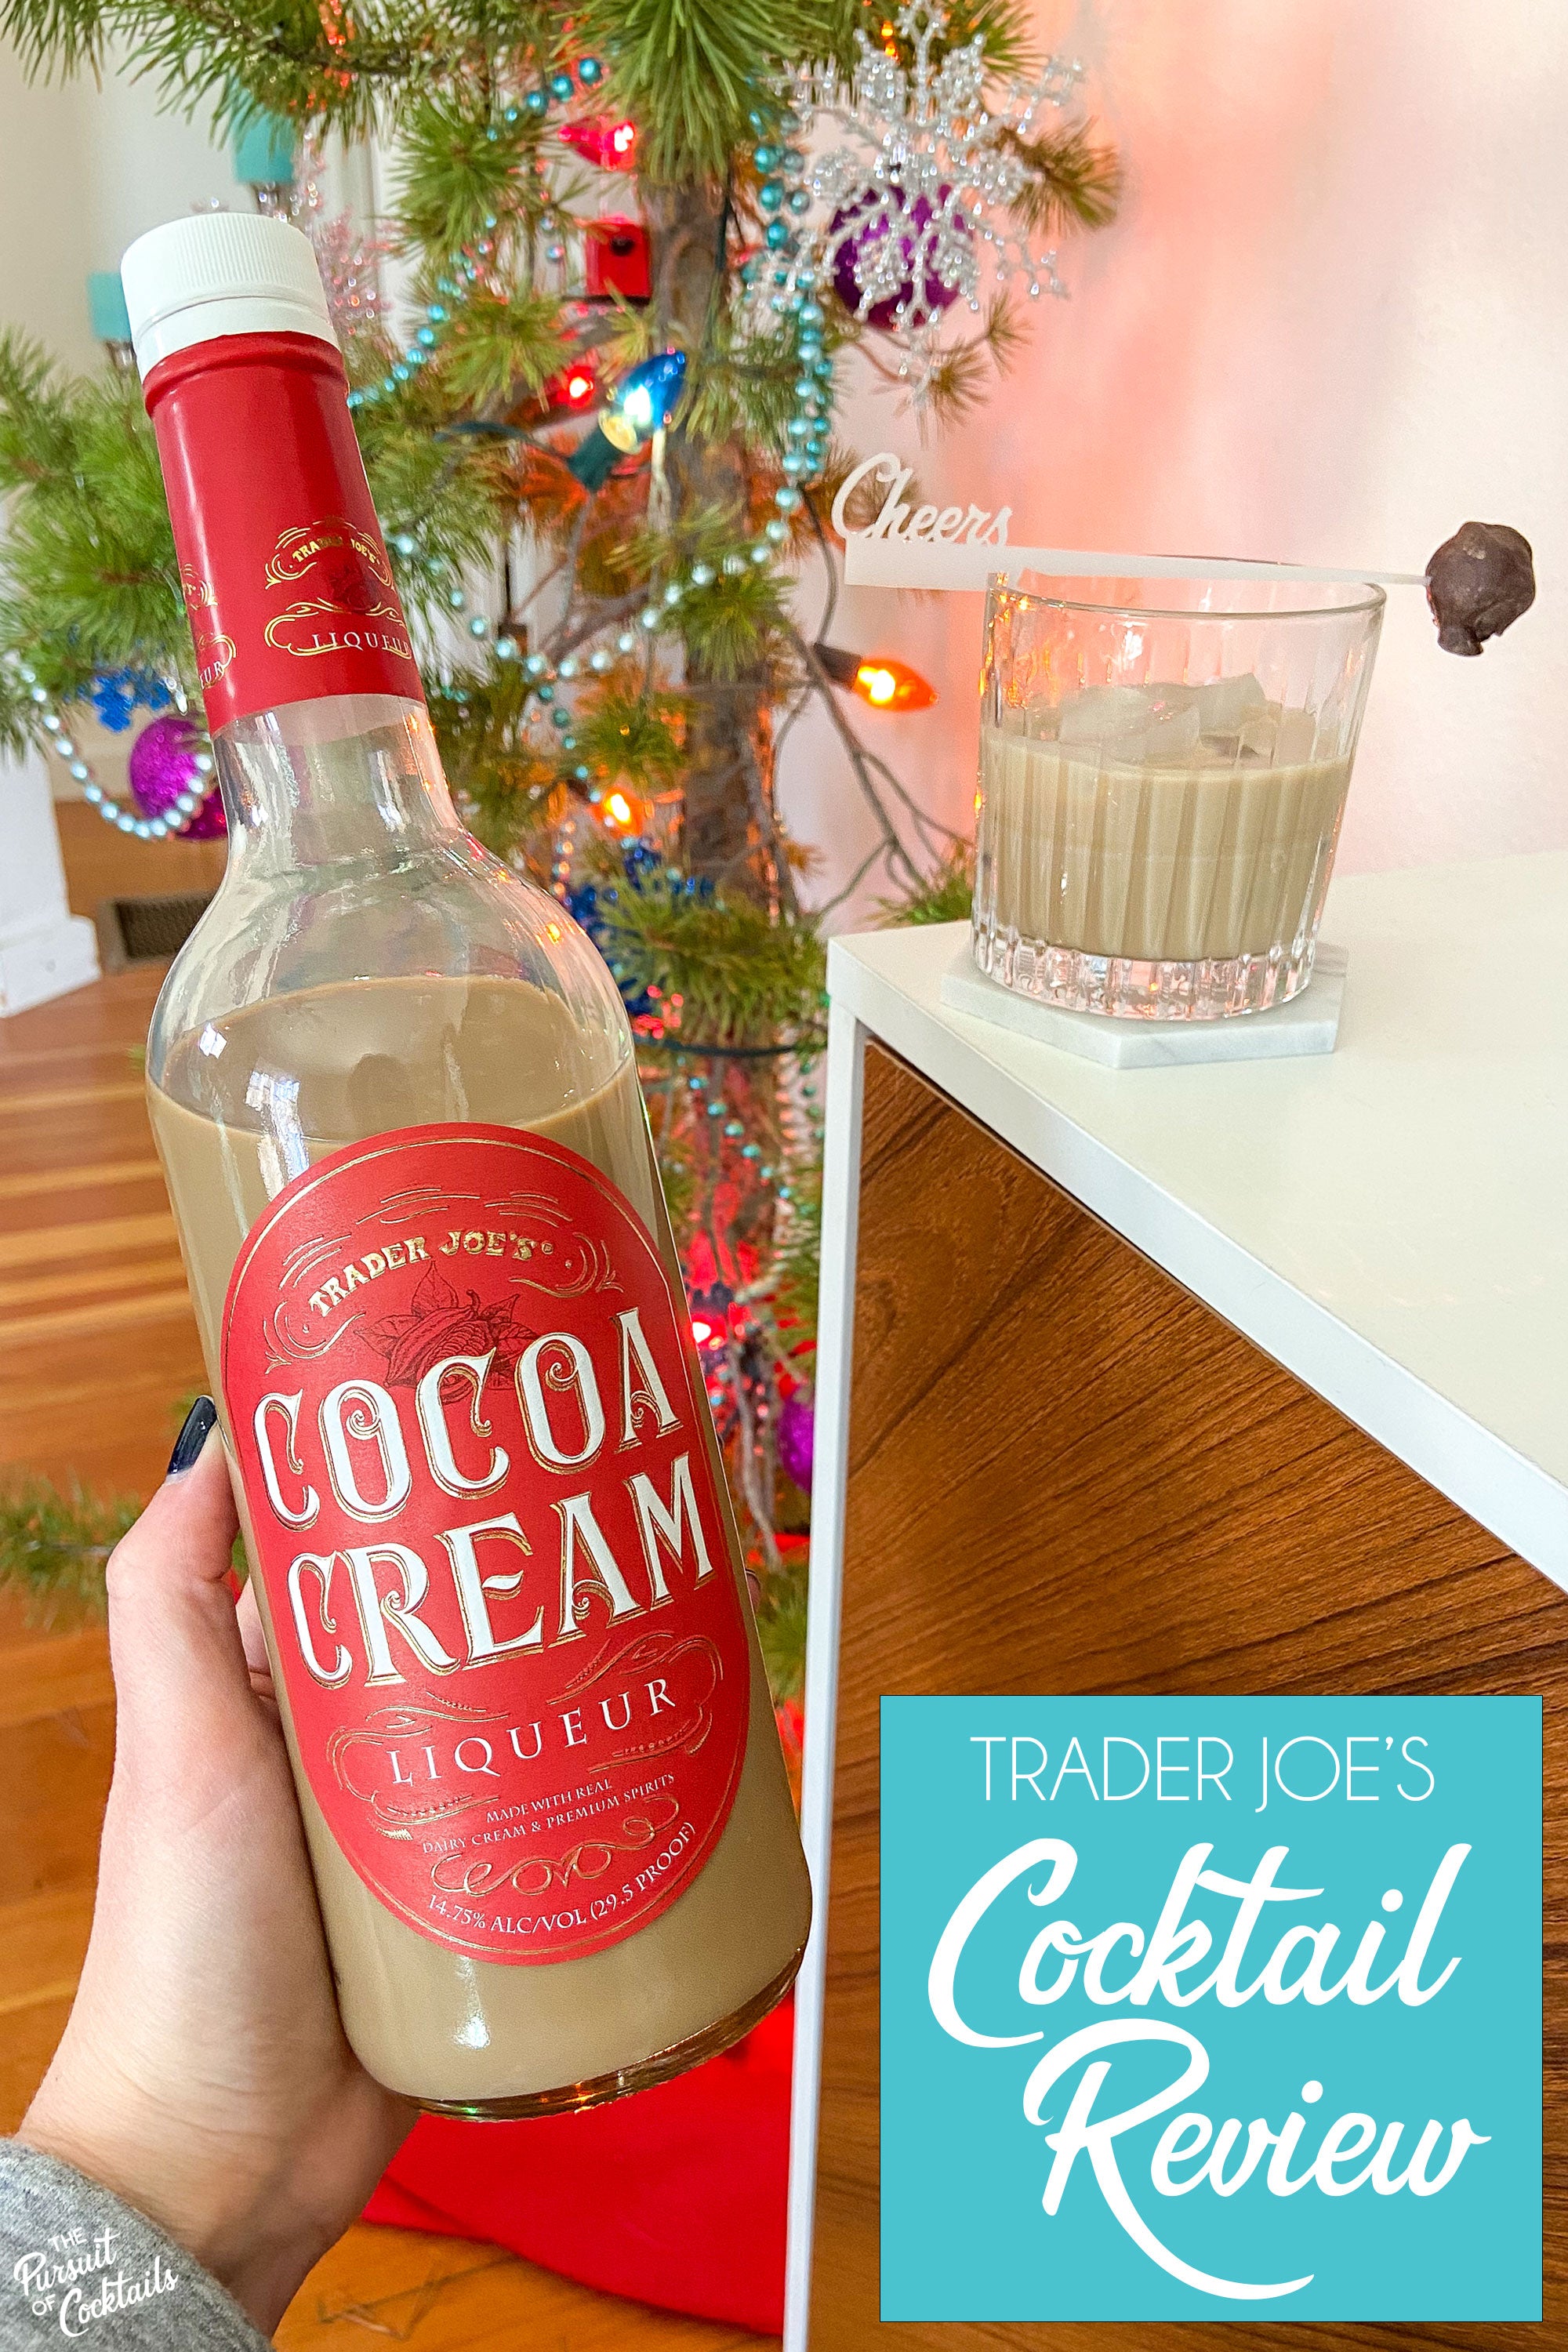 Trader Joe's Cocoa Cream liqueur review by The Pursuit of Cocktail